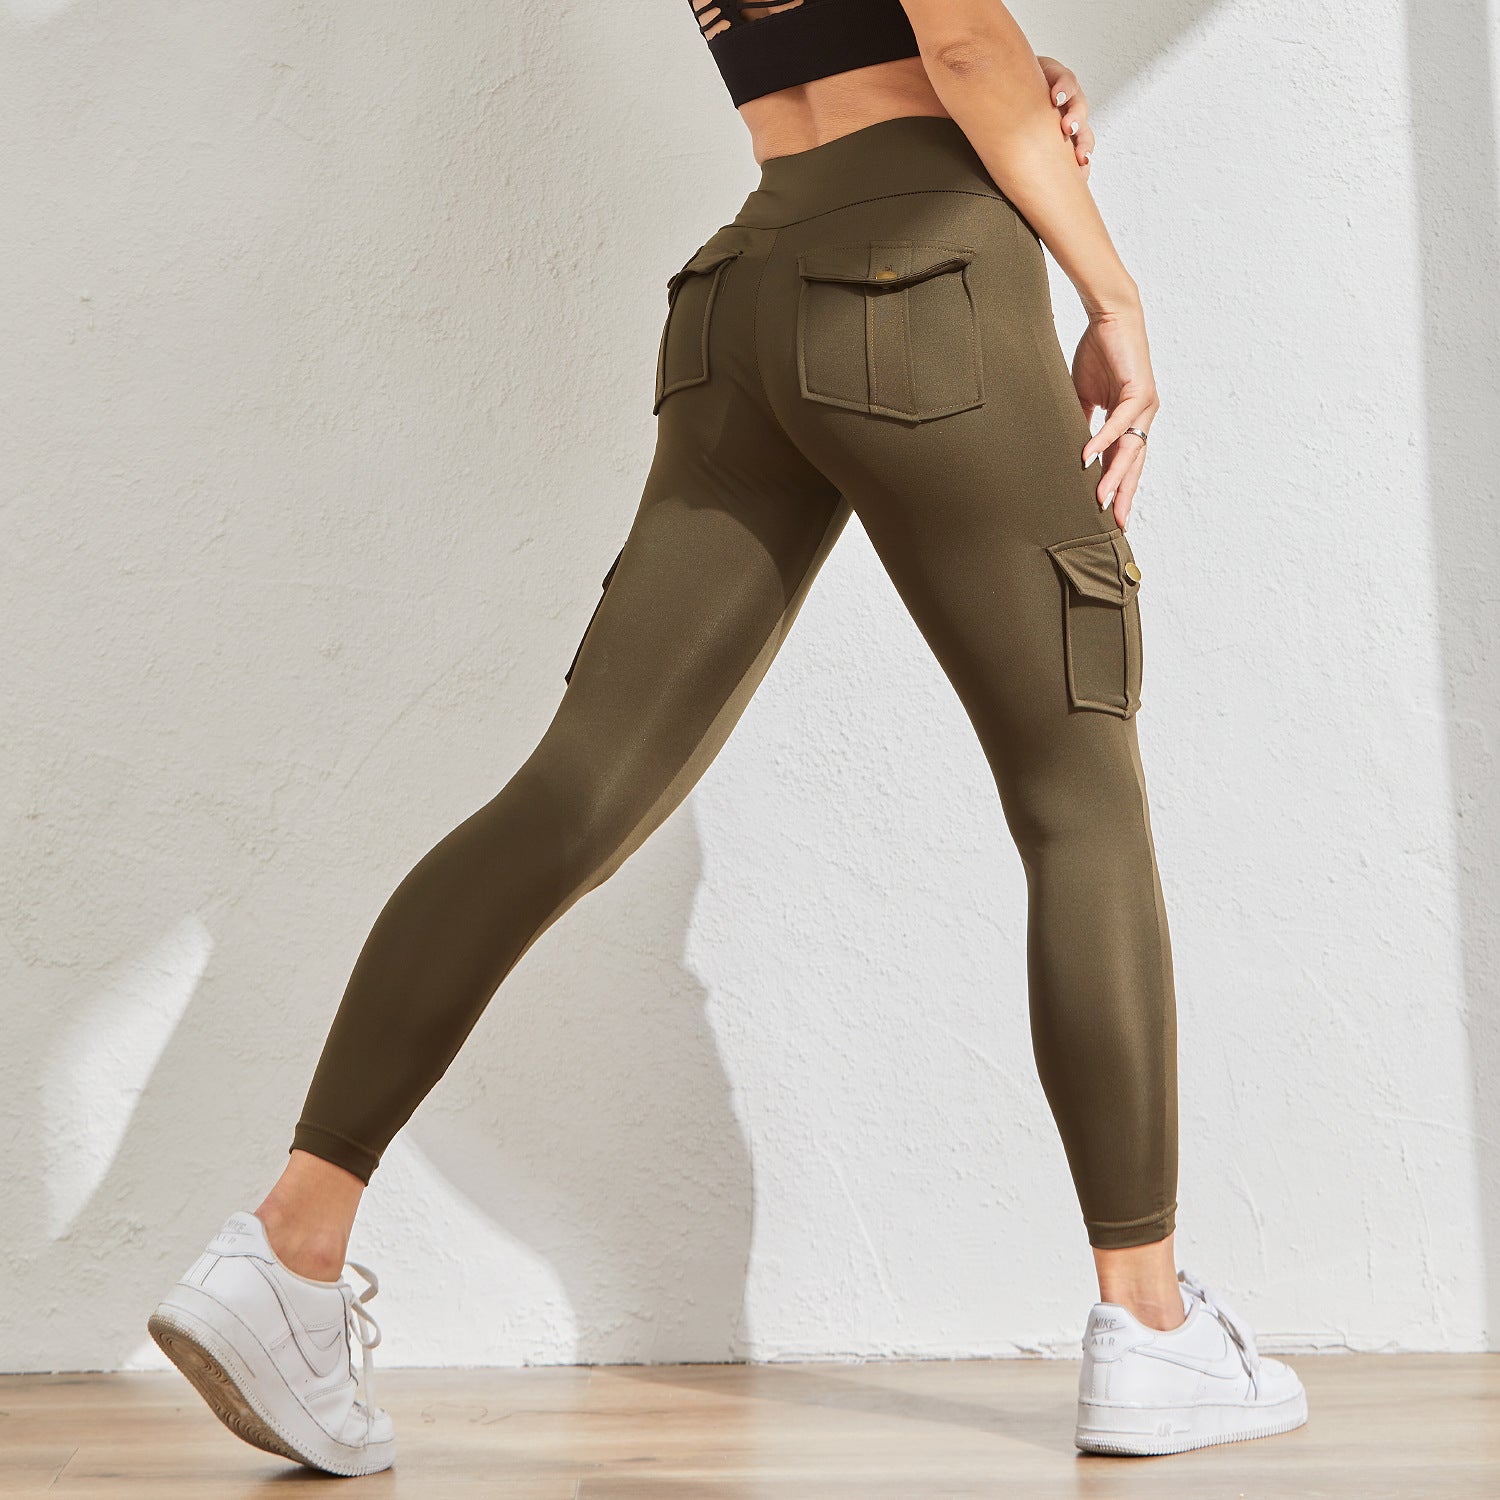 New Women's Fitness Show Thin Bottom Pants | Affordable-buy